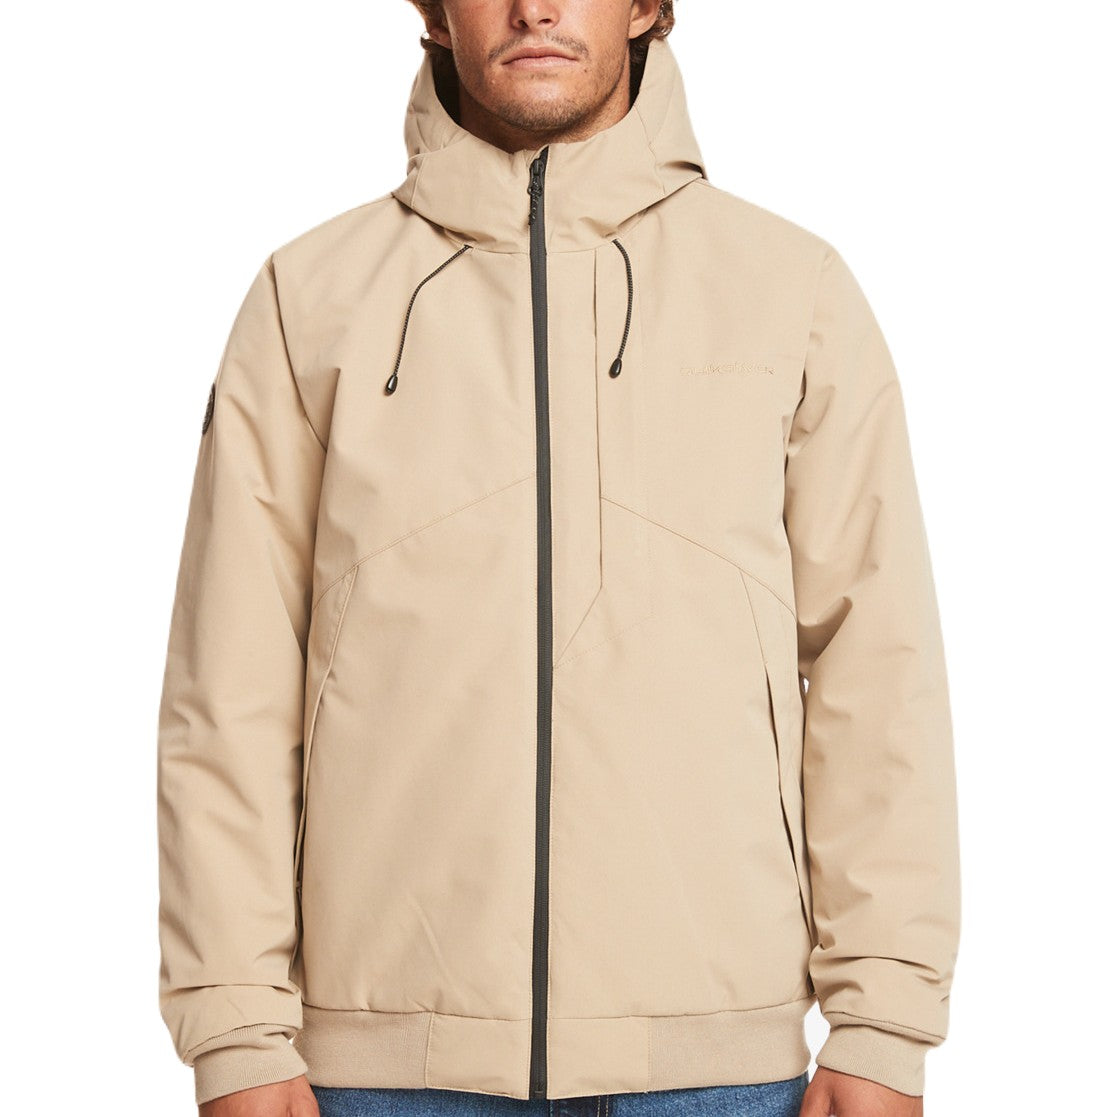 Want to buy QIKSILVER NEW BROOKS 5K WATER REPELLENT JACKET - PLAGE? At The  Old Man Boardsports